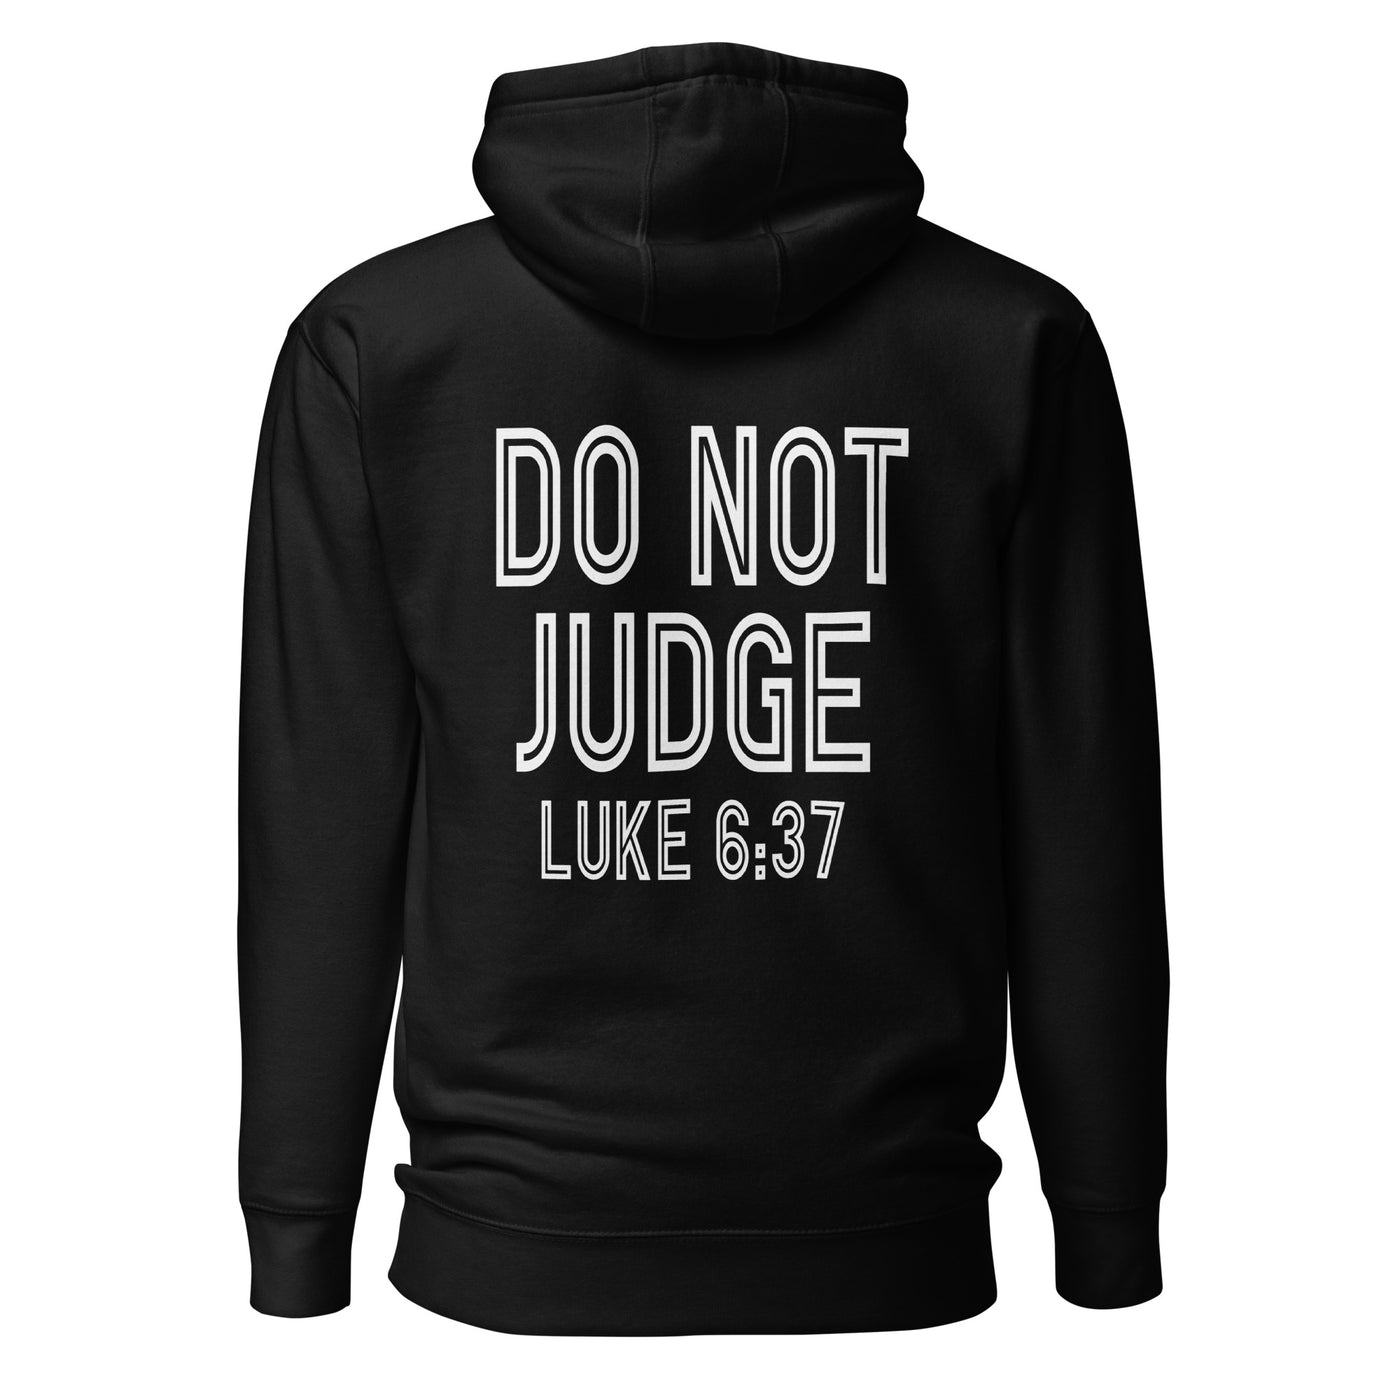 Christian Jesus is Lord Do Not Judge Two Sided Hoodie